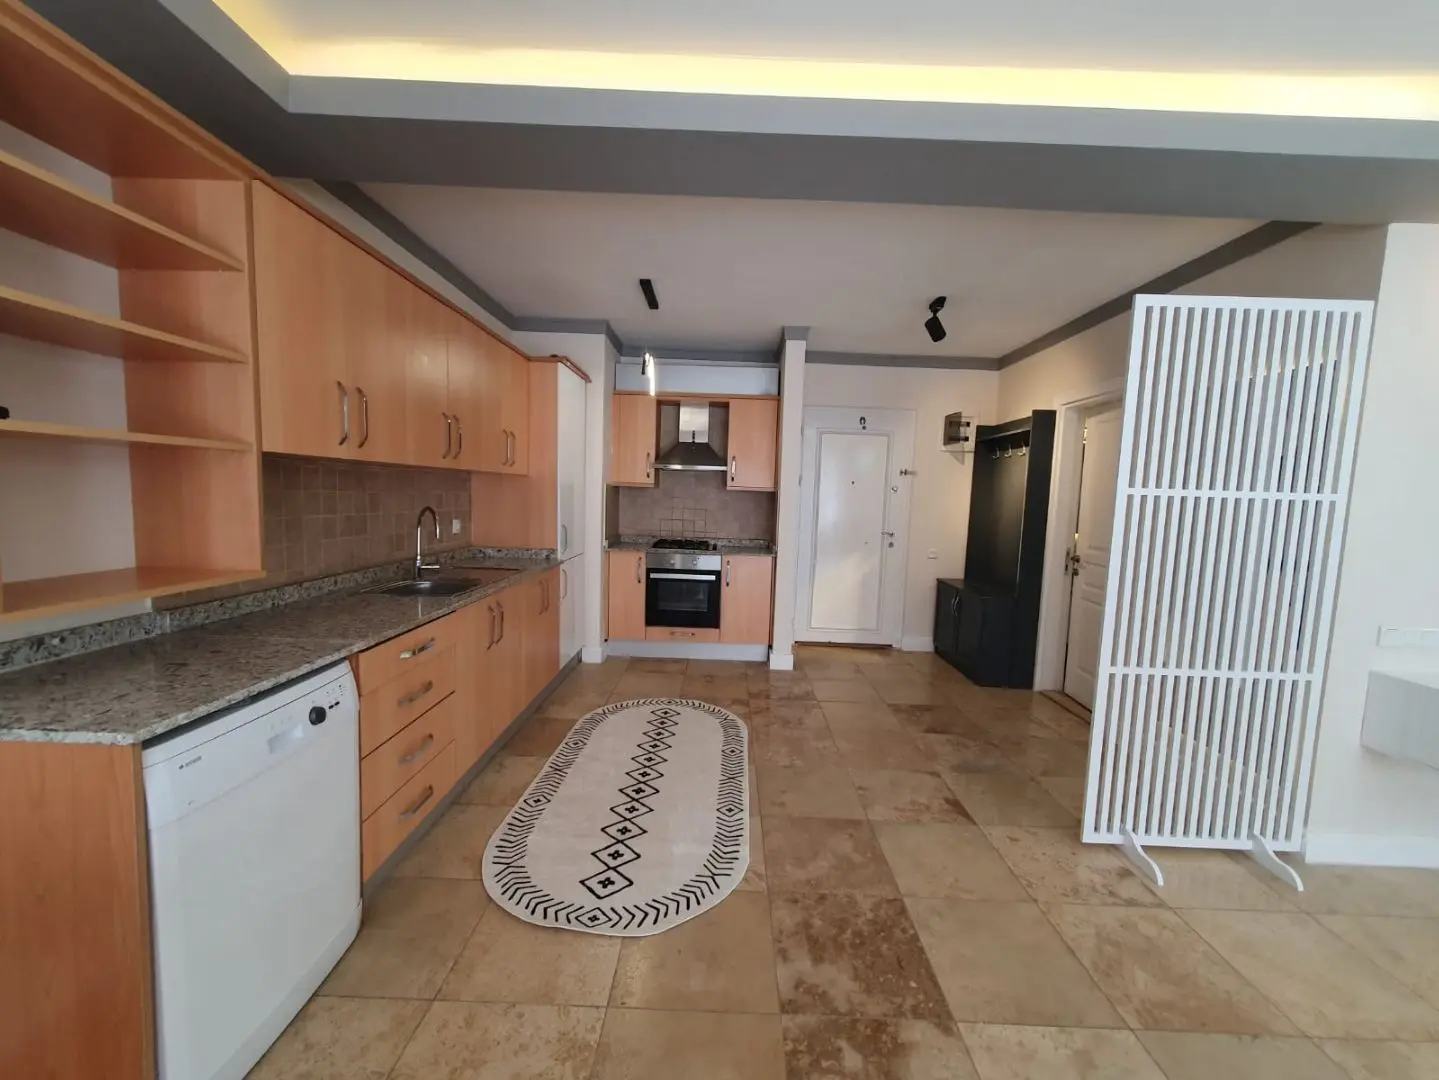 FULLY FURNISHED SPACIOUS 1+1 APARTMENT IN ALANYA CİKCİLLİ